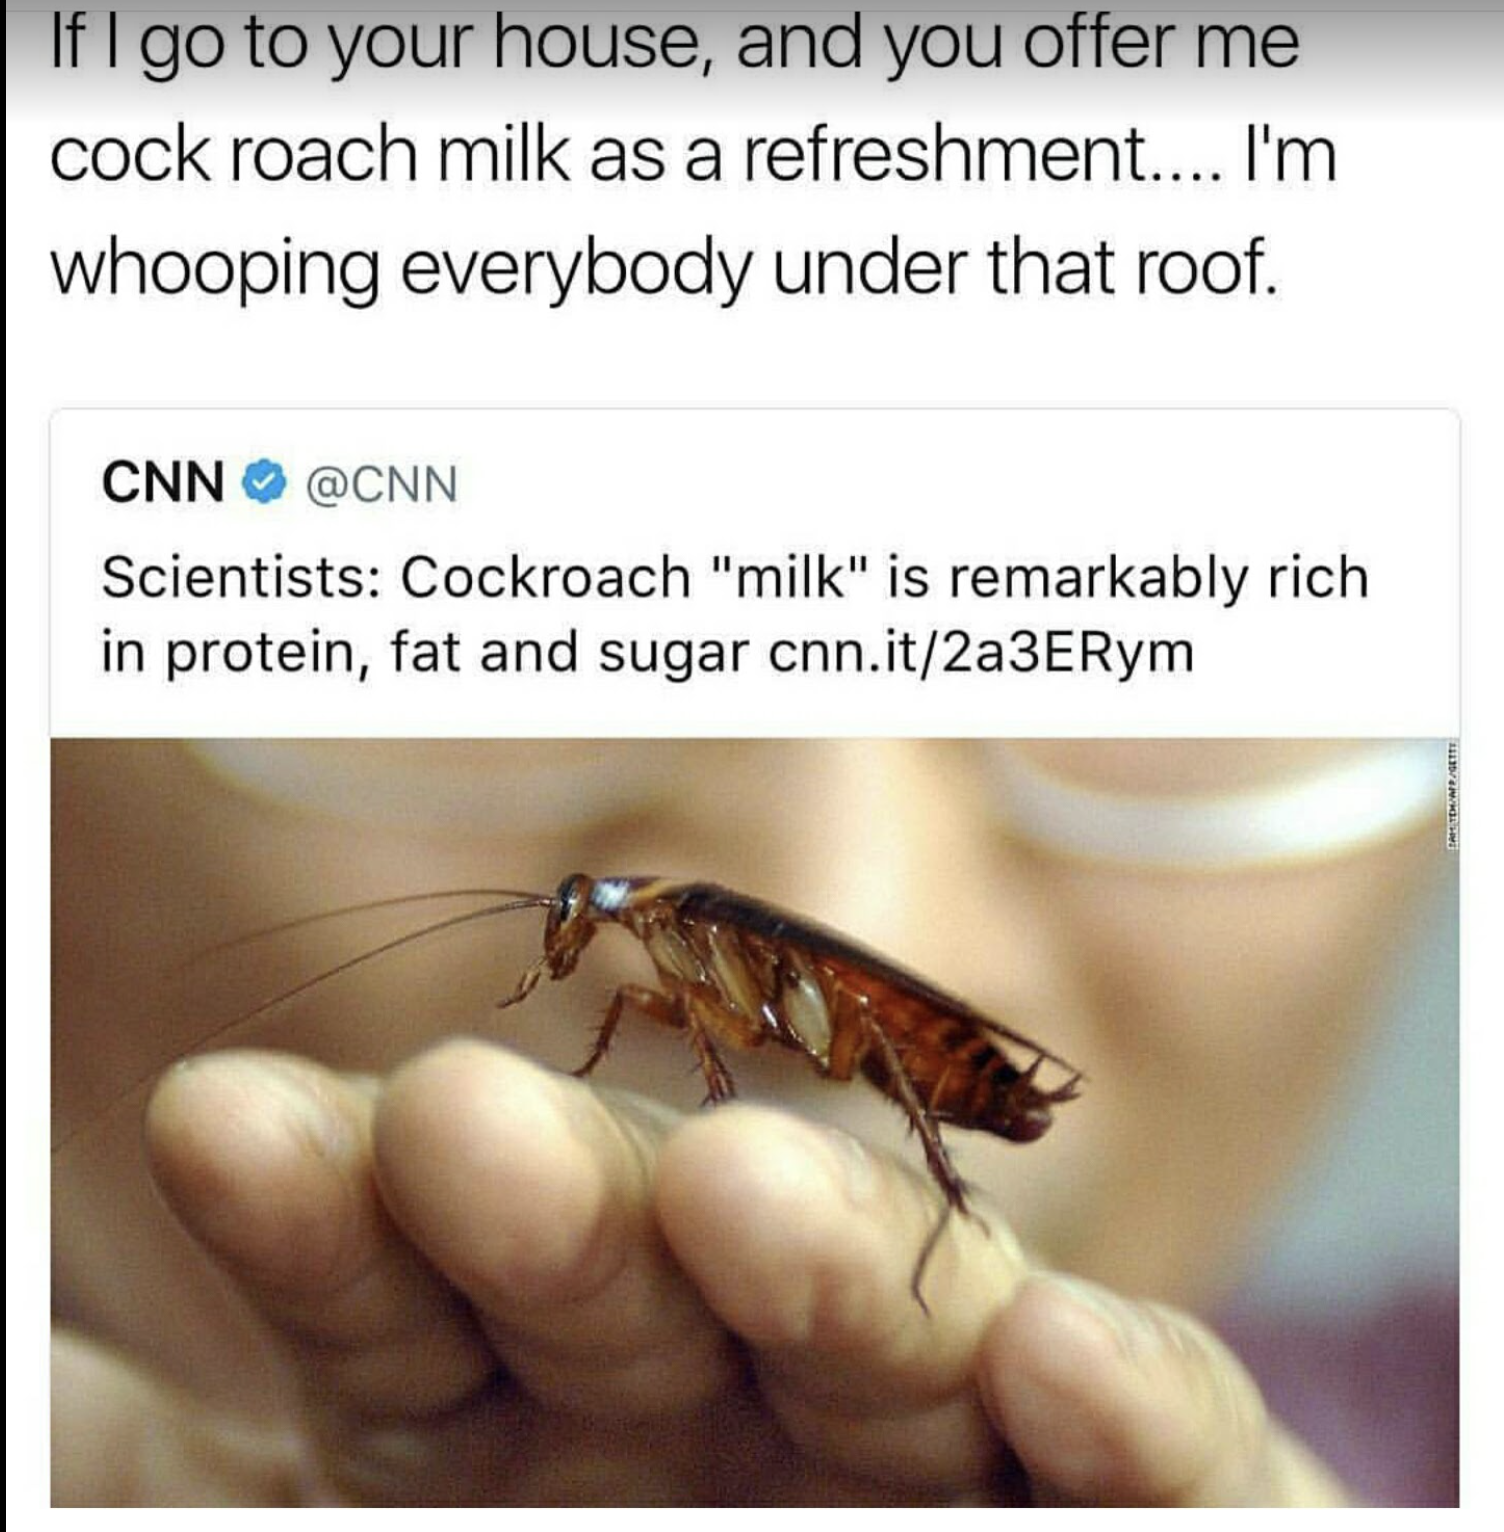 cockroach - If I go to your house, and you offer me cock roach milk as a refreshment.... I'm whooping everybody under that roof. Cnn Scientists Cockroach "milk" is remarkably rich in protein, fat and sugar cnn.it2a3ERym